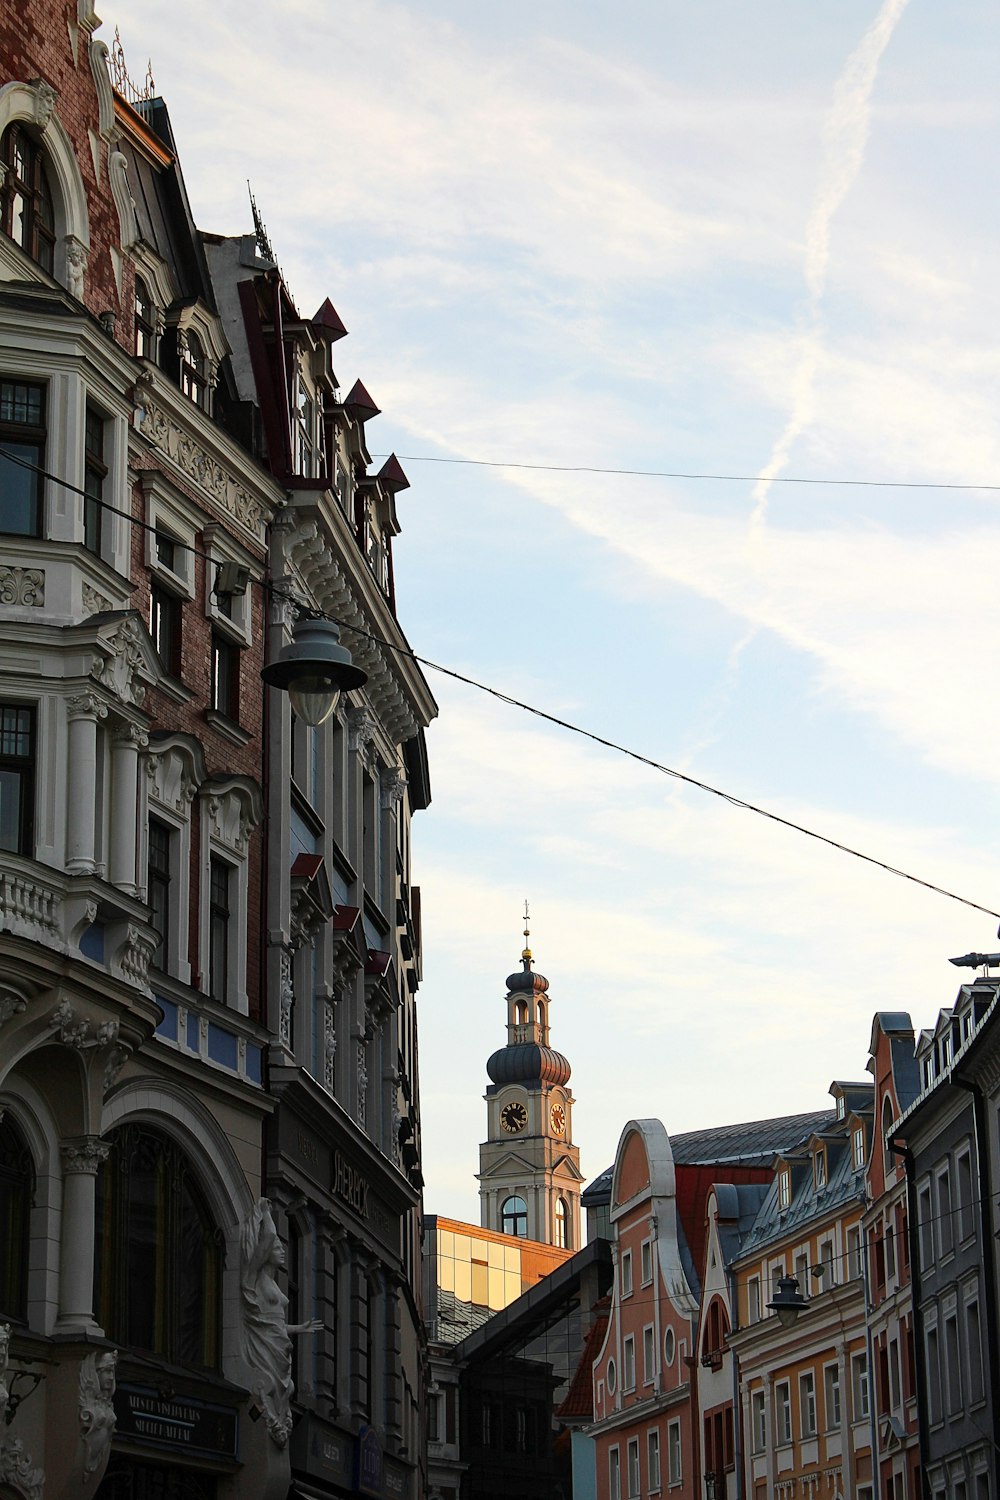 a city street with buildings and a clock tower in the background